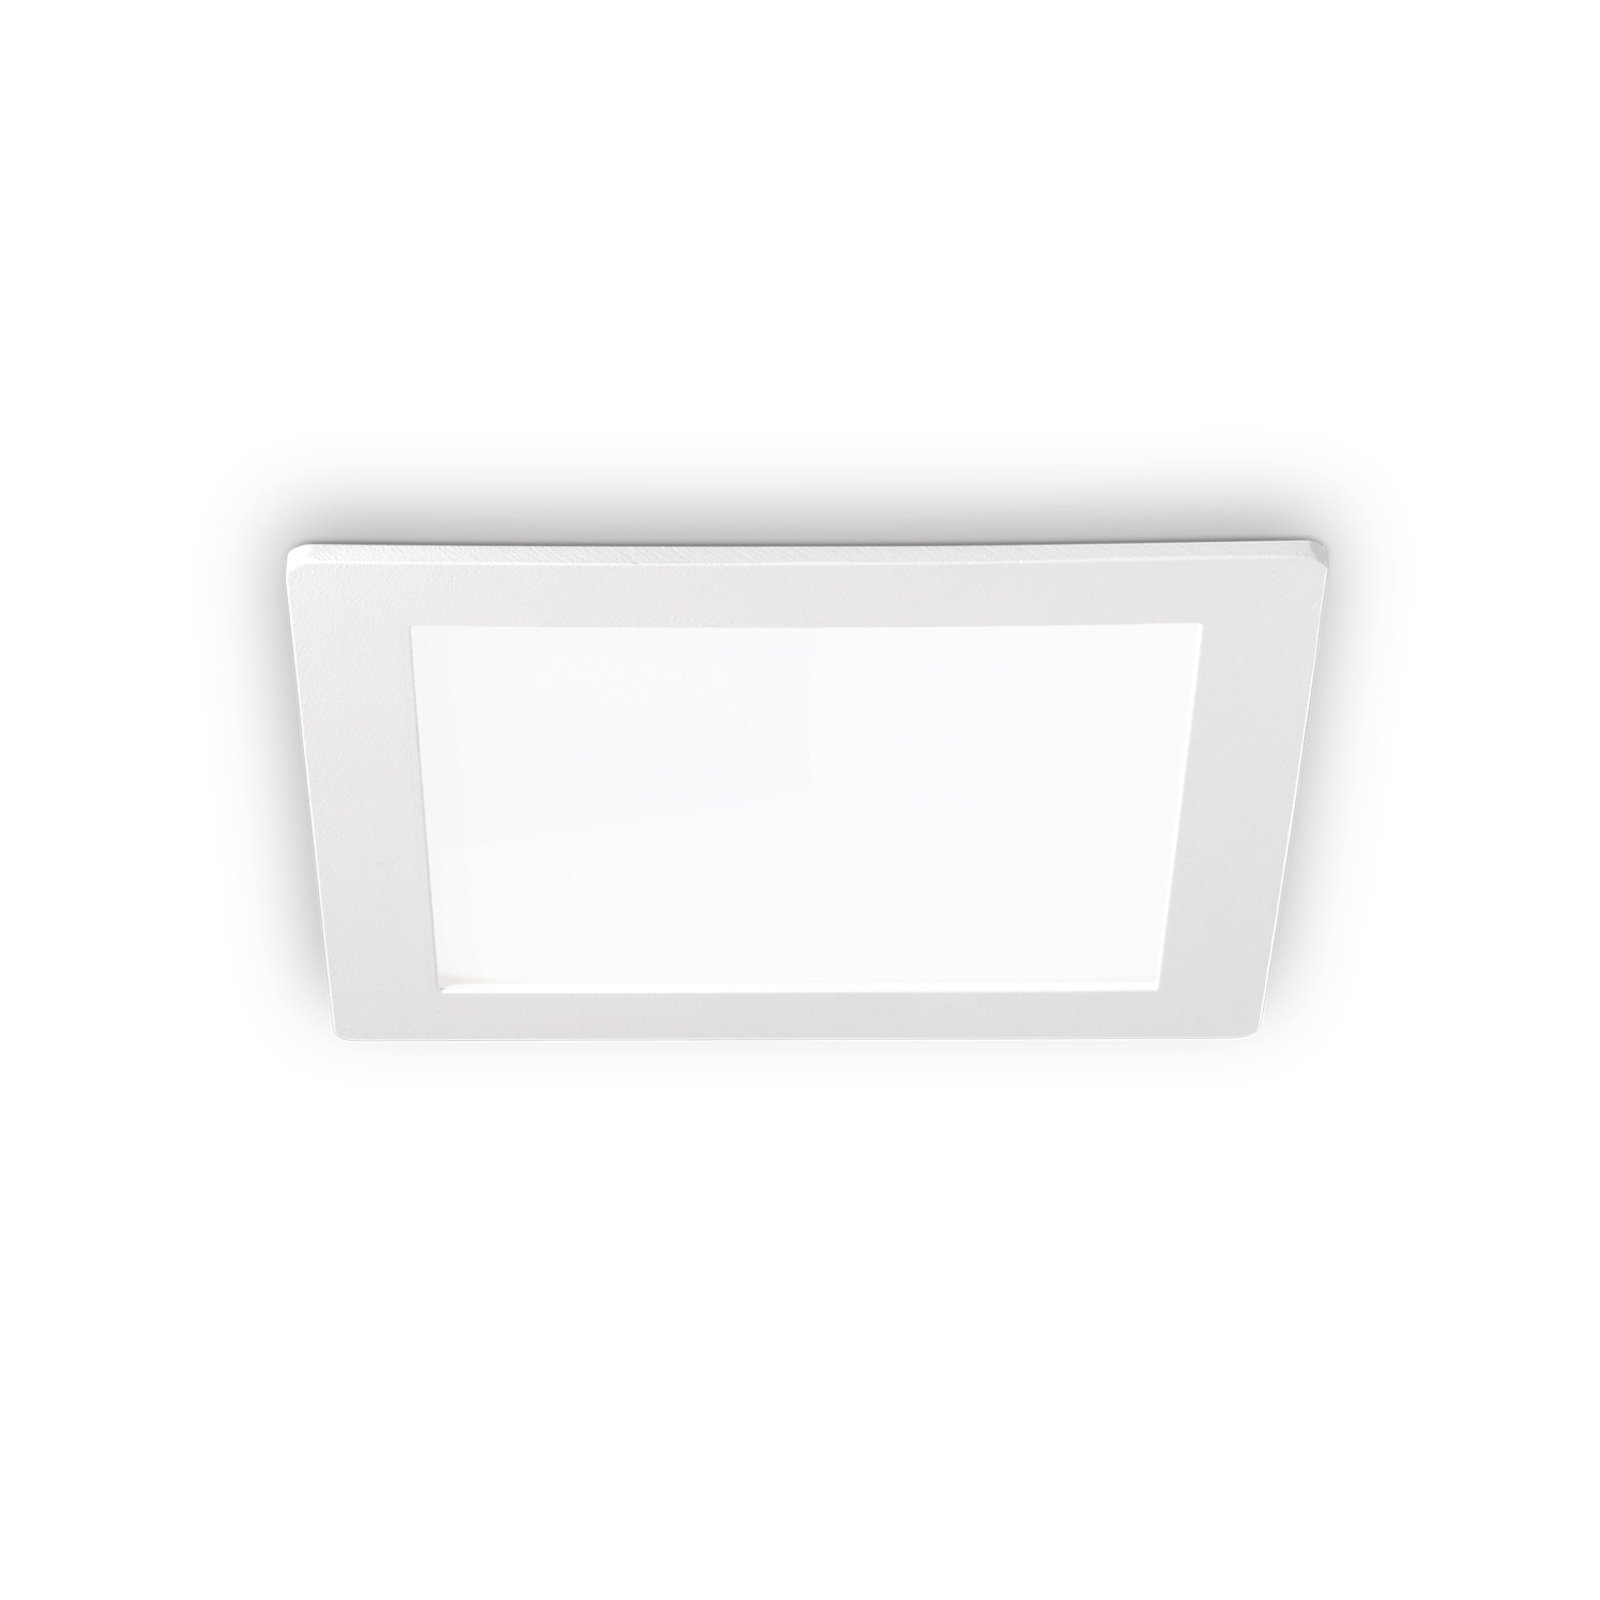 LED-taklampe Groove square 11,8x11,8 cm